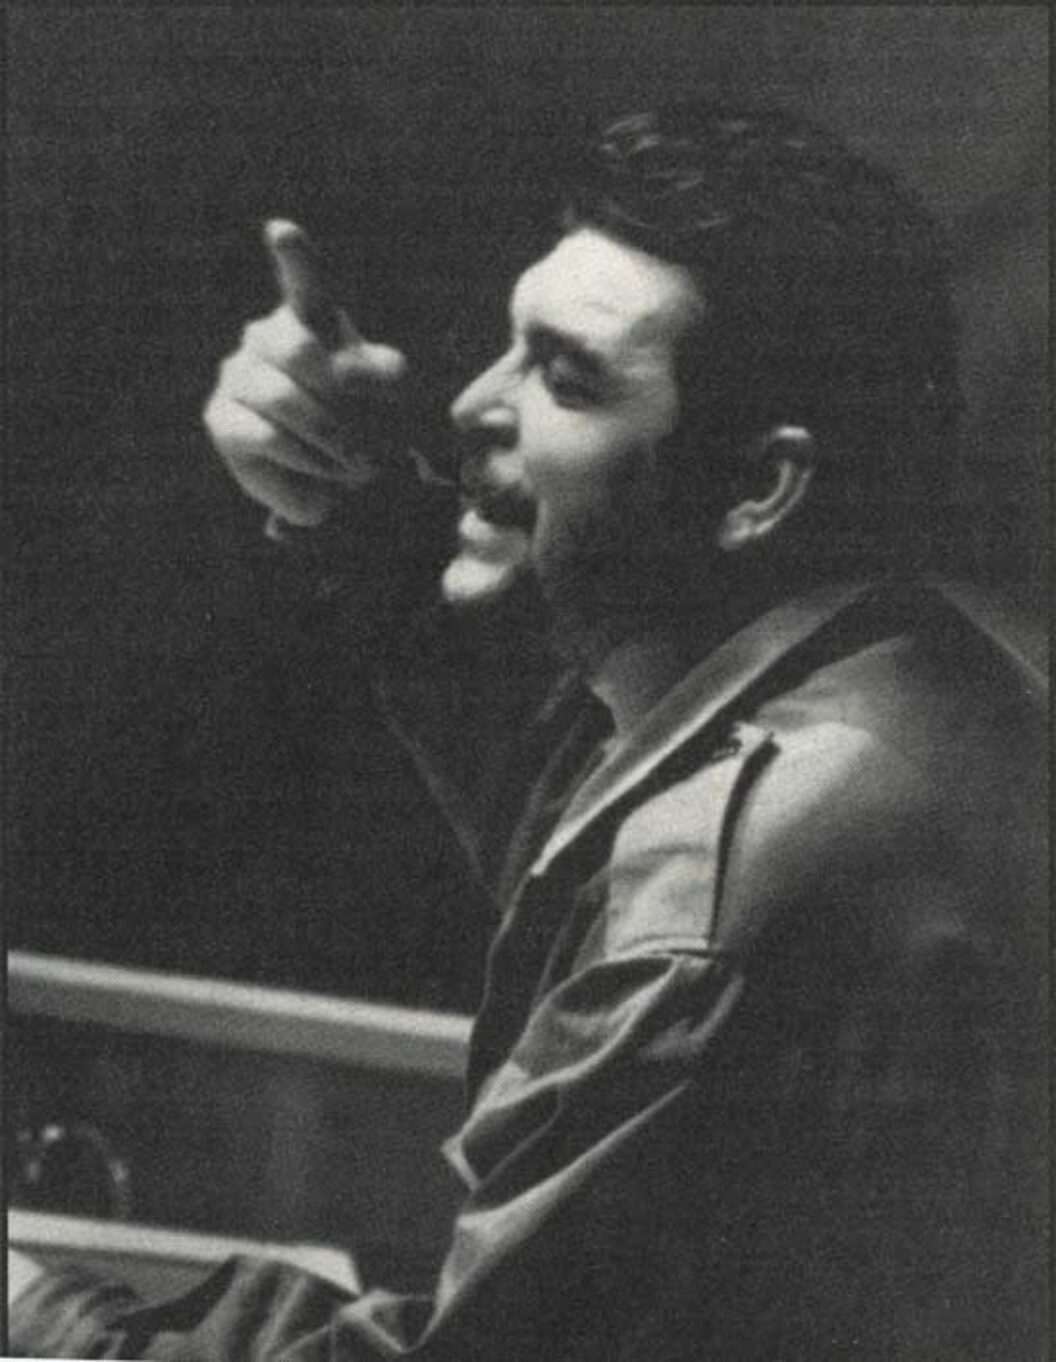 Che by Jon Lee Anderson